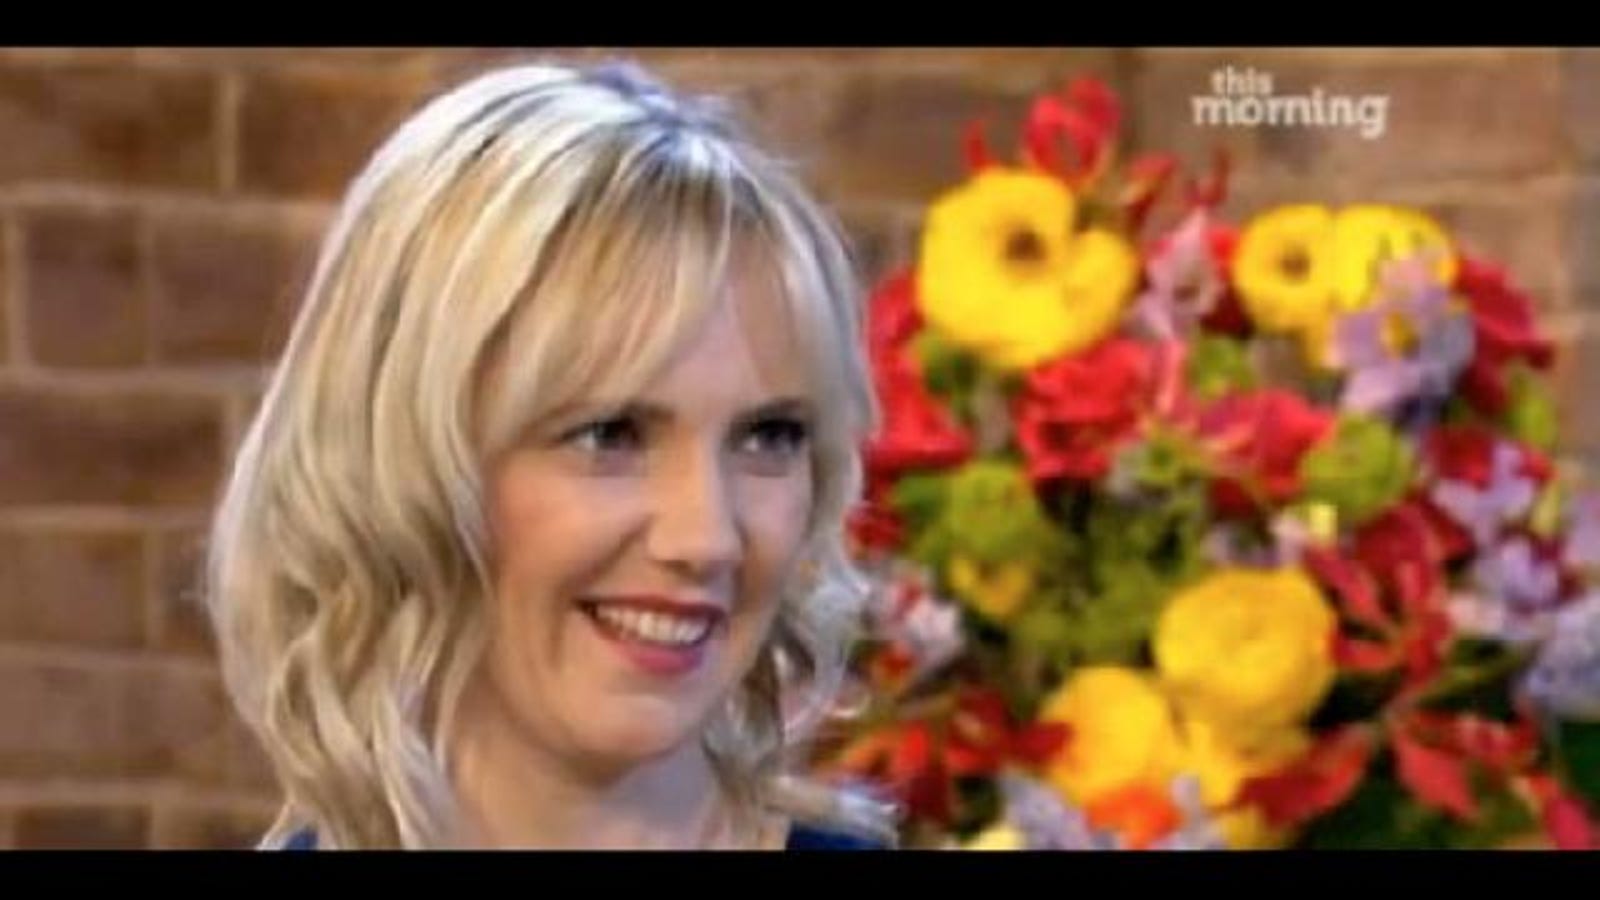 Samantha Brick Explains Shes Hot Compared To The Old French Hags She Rolls With 1039